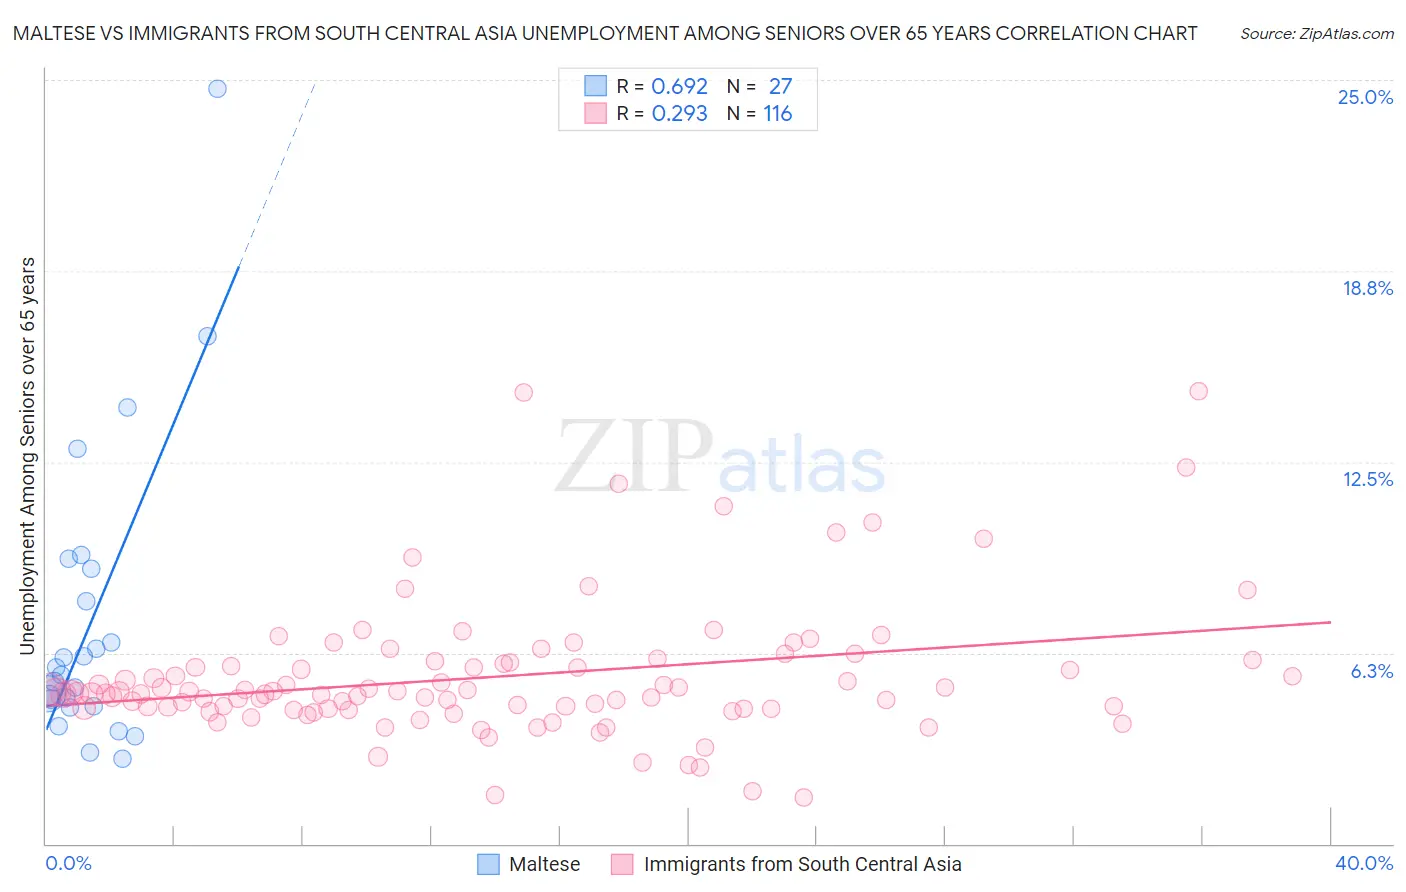 Maltese vs Immigrants from South Central Asia Unemployment Among Seniors over 65 years